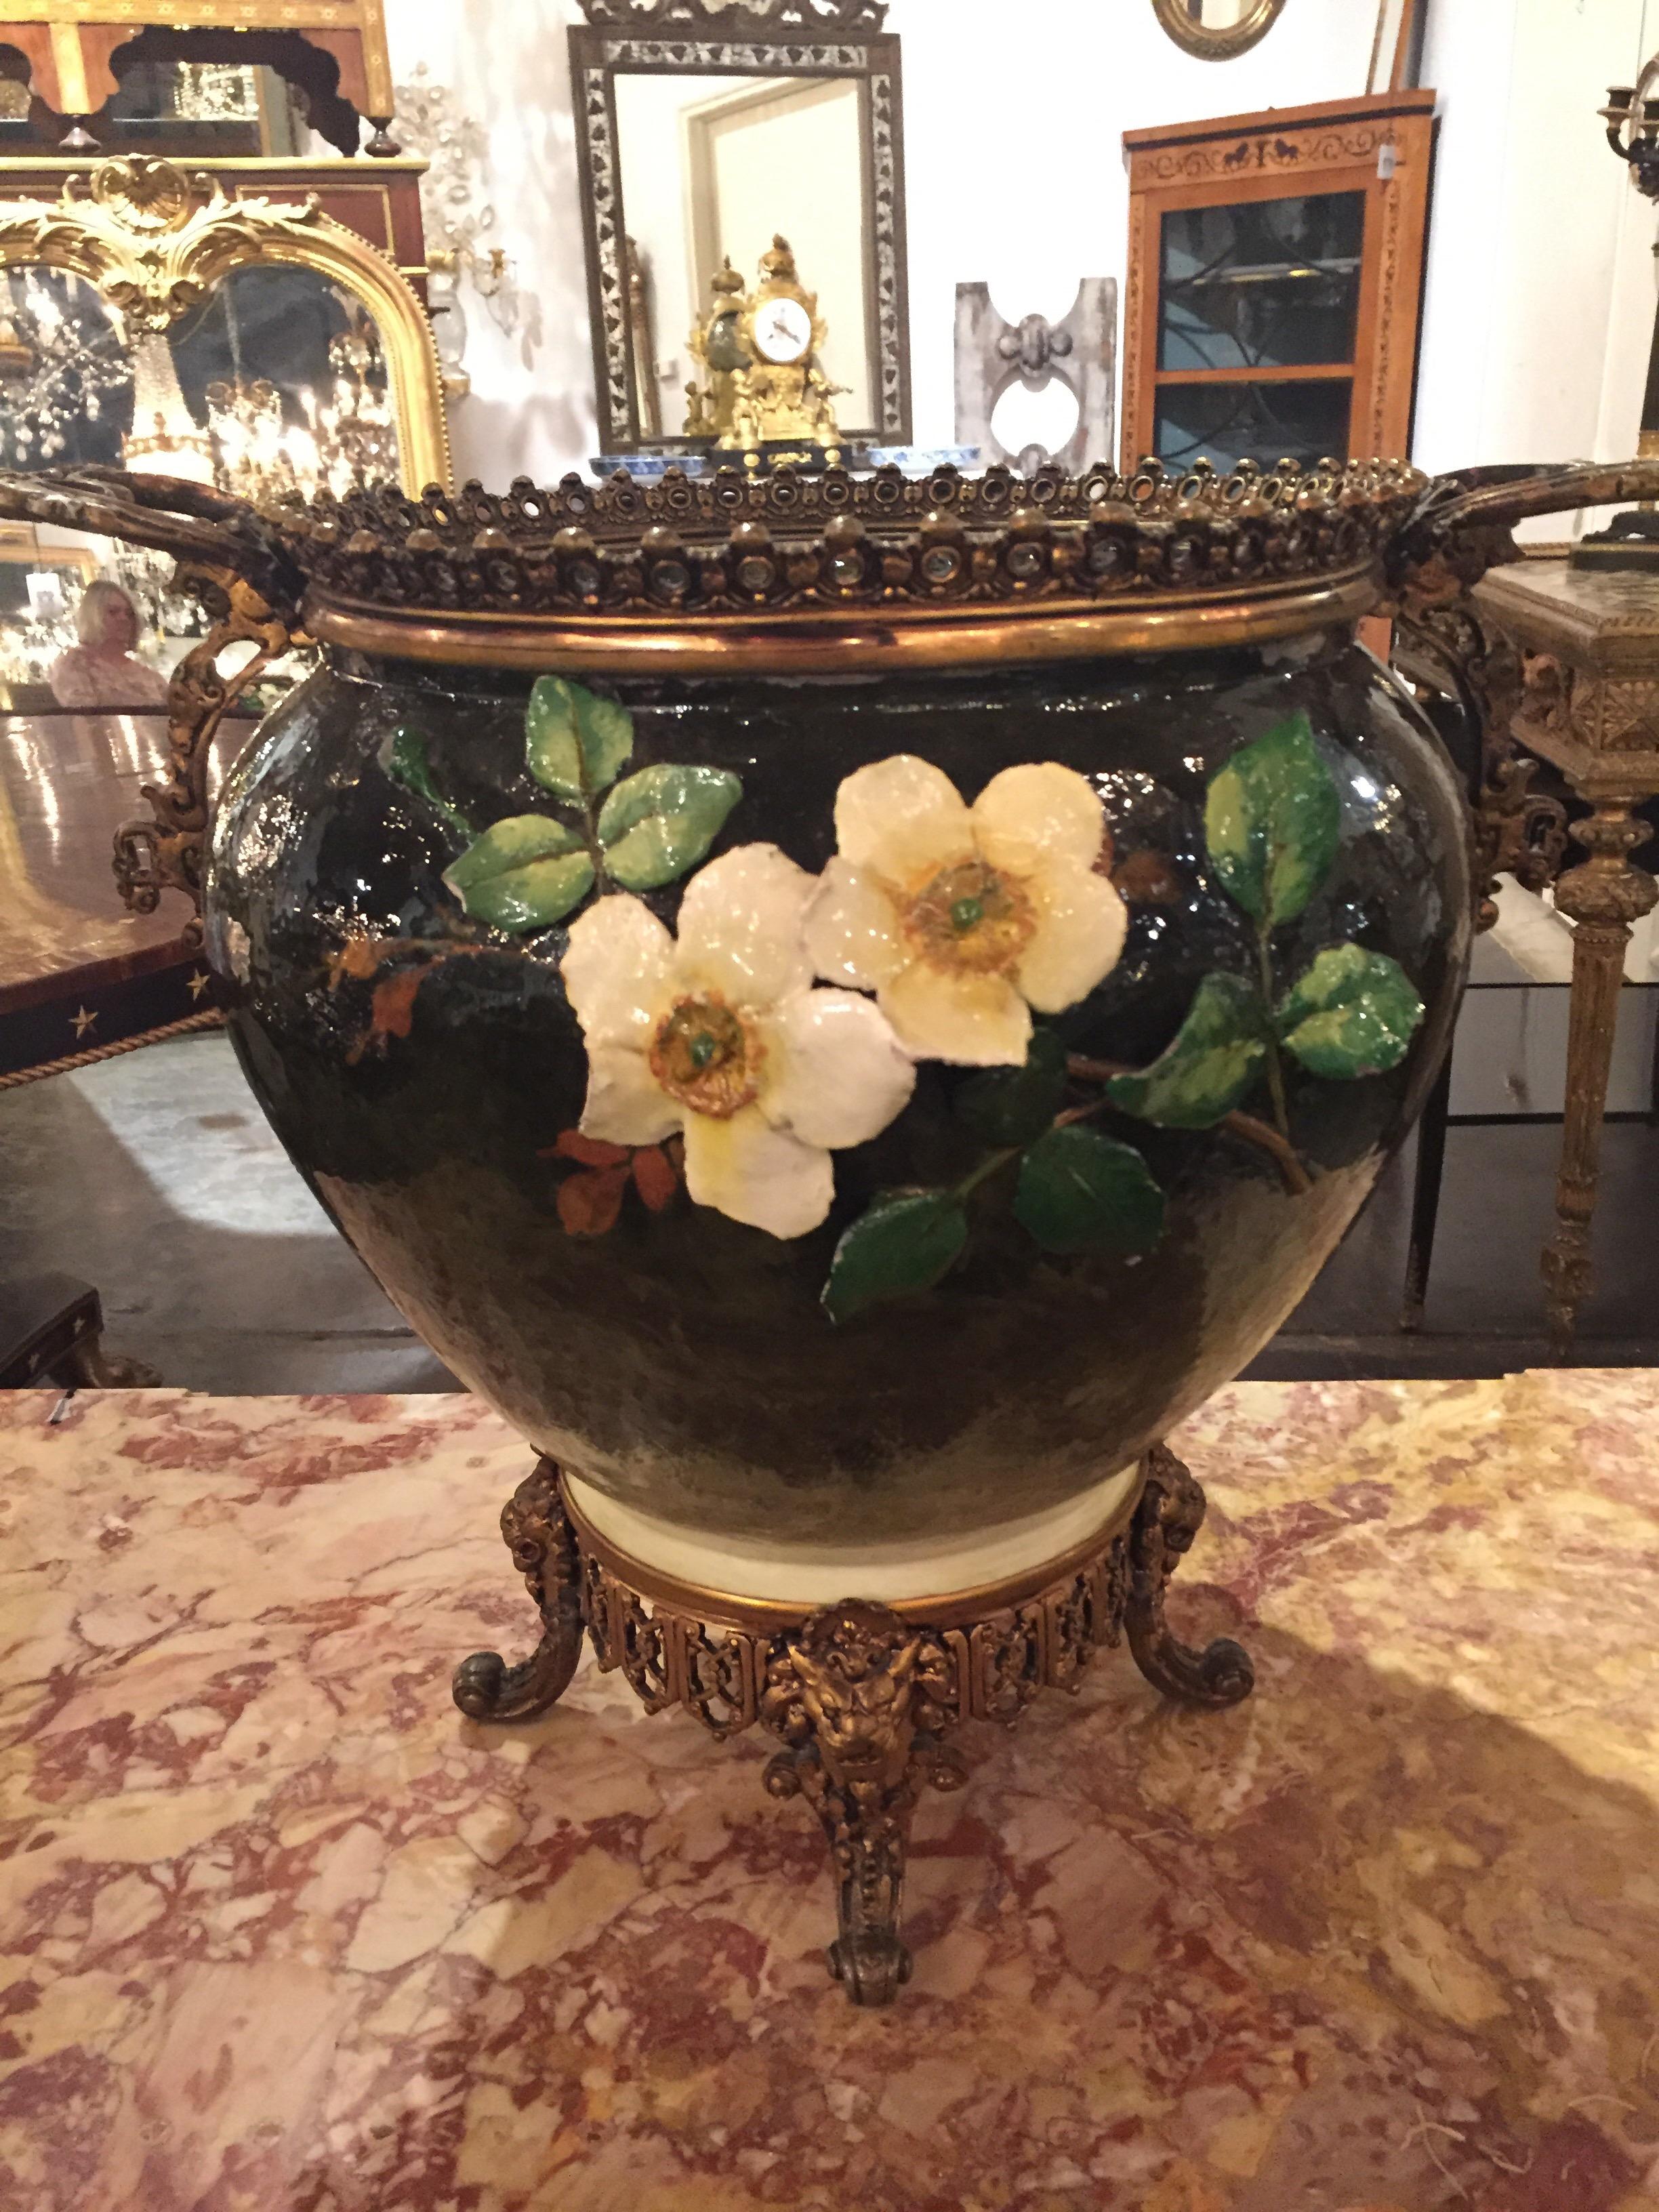 Antique French Barotine vase which is hand painted in dark blue. The vase has high relief white, pink and yellow flowers and it has a bronze pedestal and handles. It would make for an exquisite floral arrangement in a dining room or living room.